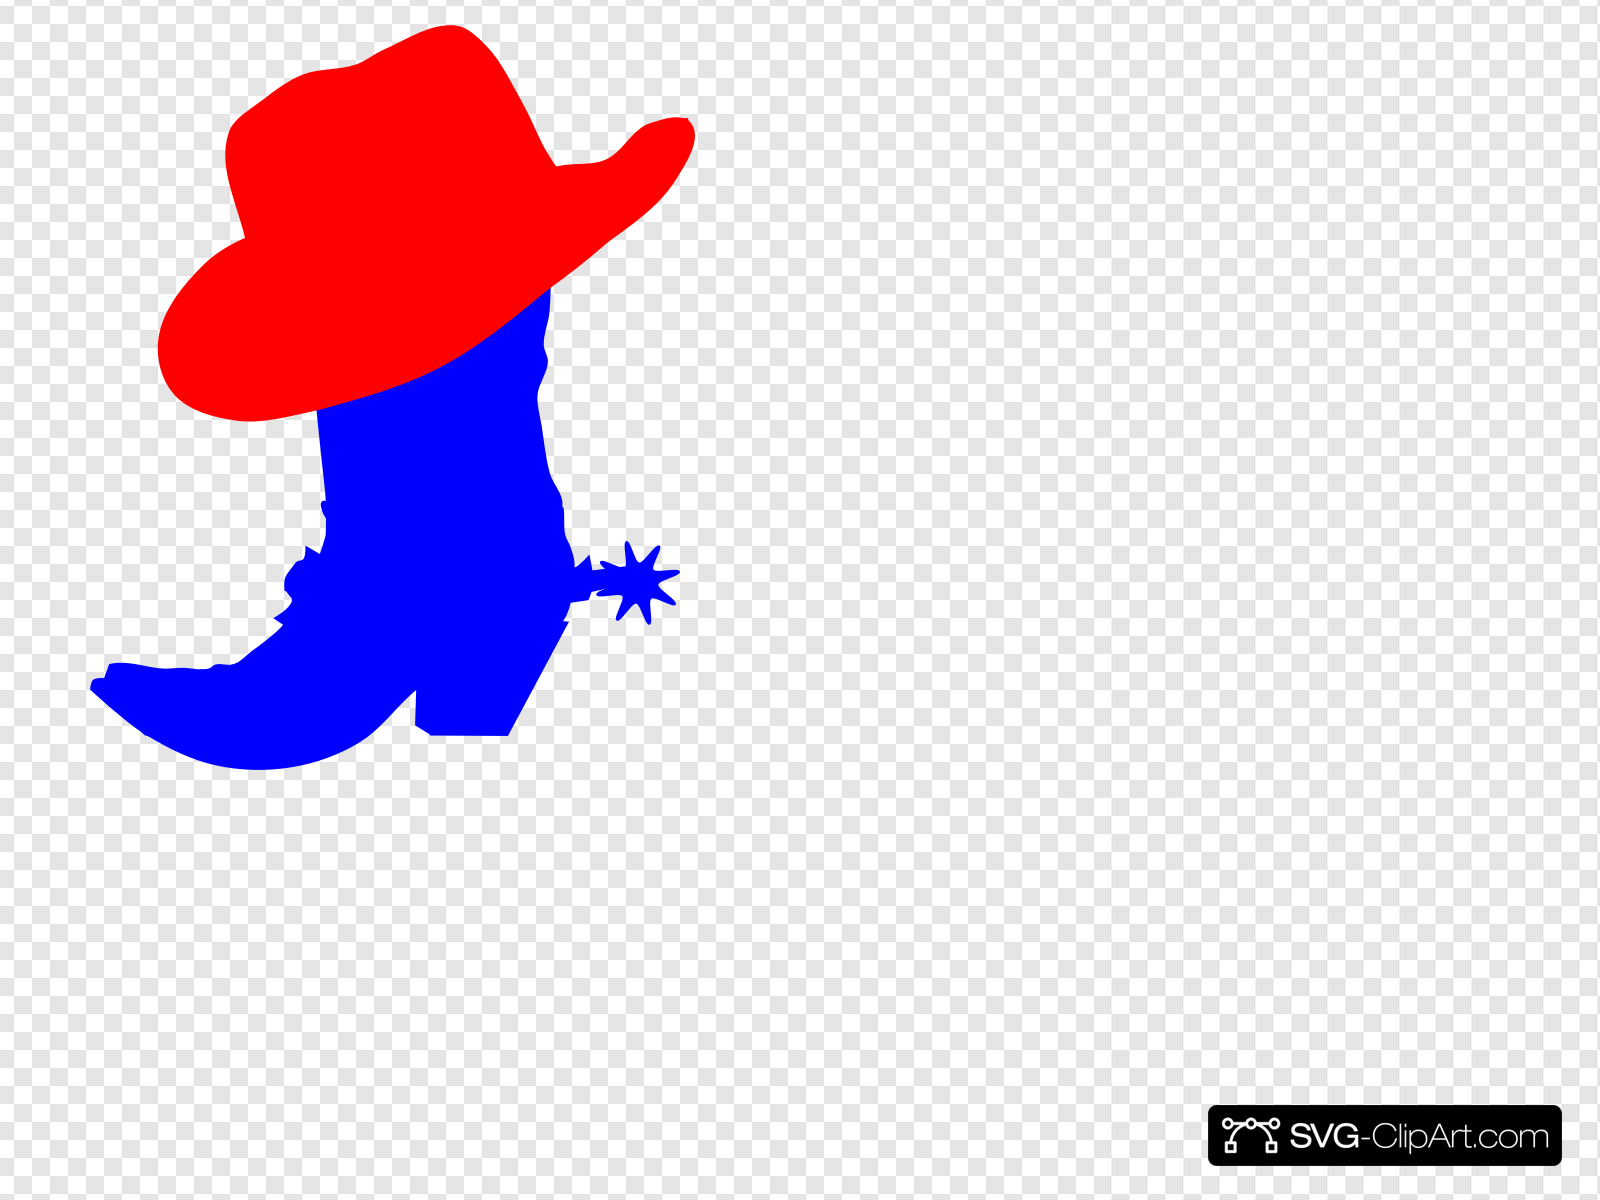 Red Cowboy Hat Clip art, Icon and SVG.